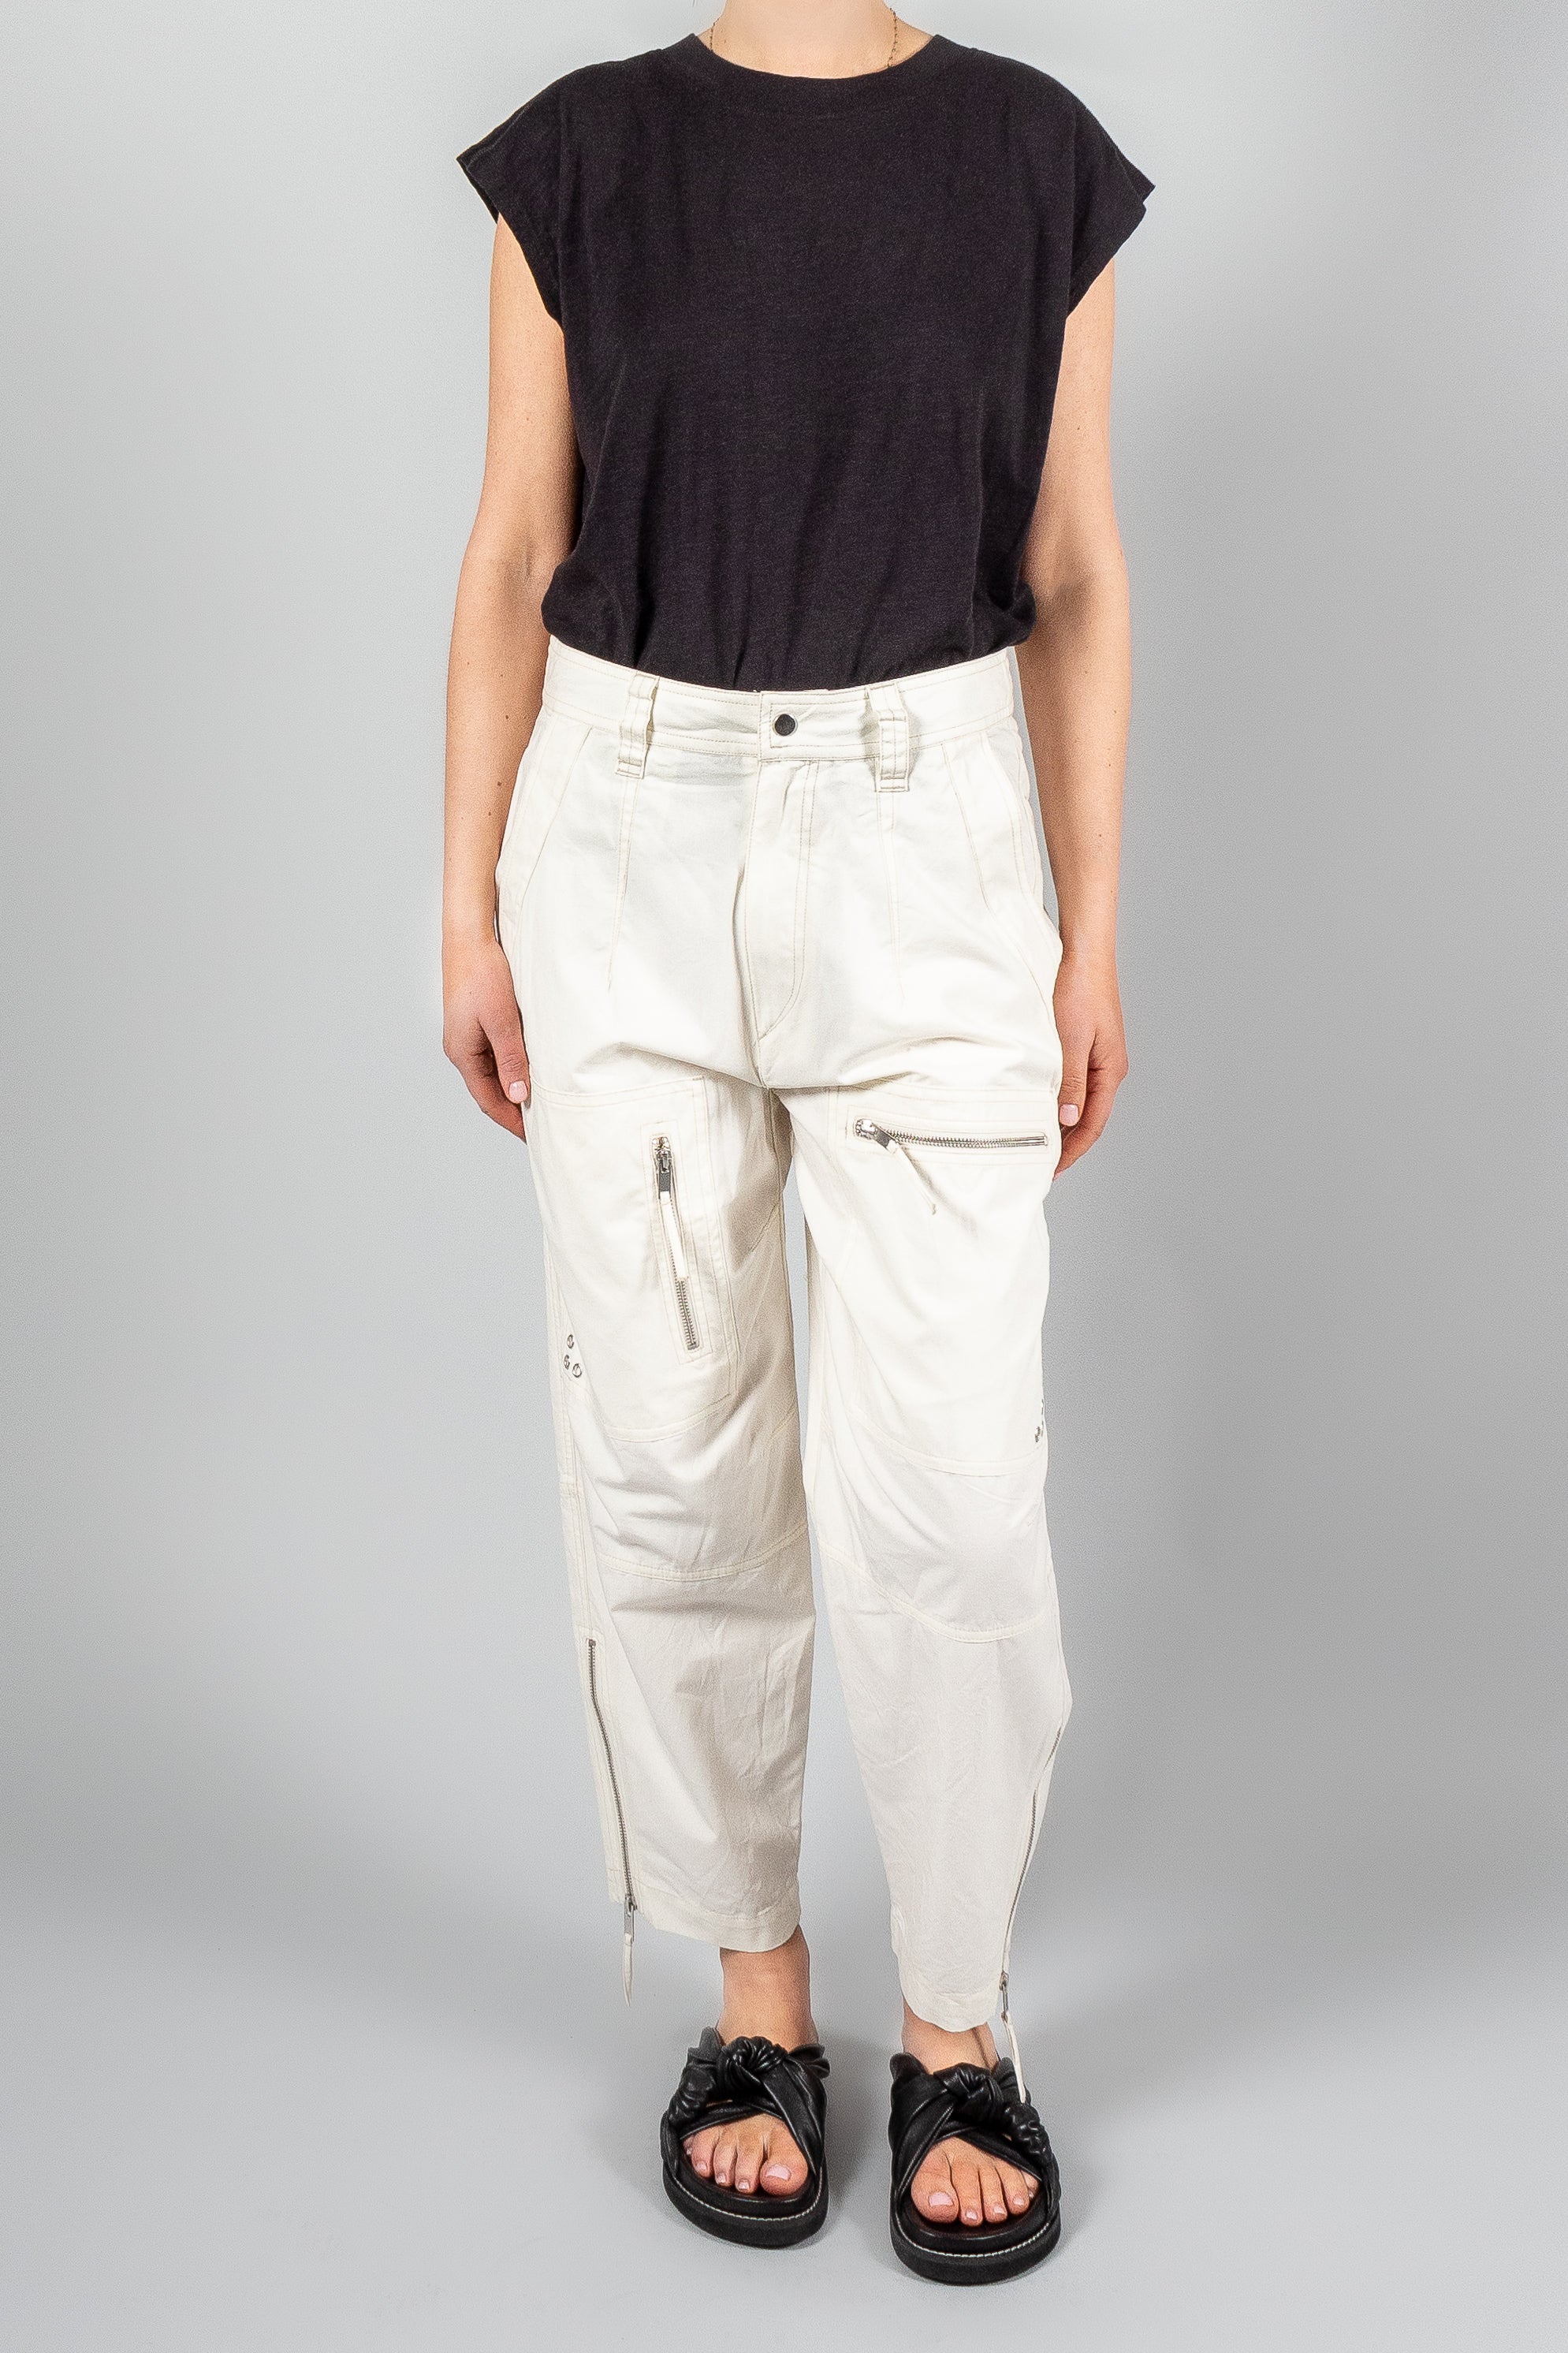 Isabel Marant Etoile Kelvin Pants-Pants and Shorts-Misch-Boutique-Vancouver-Canada-misch.ca